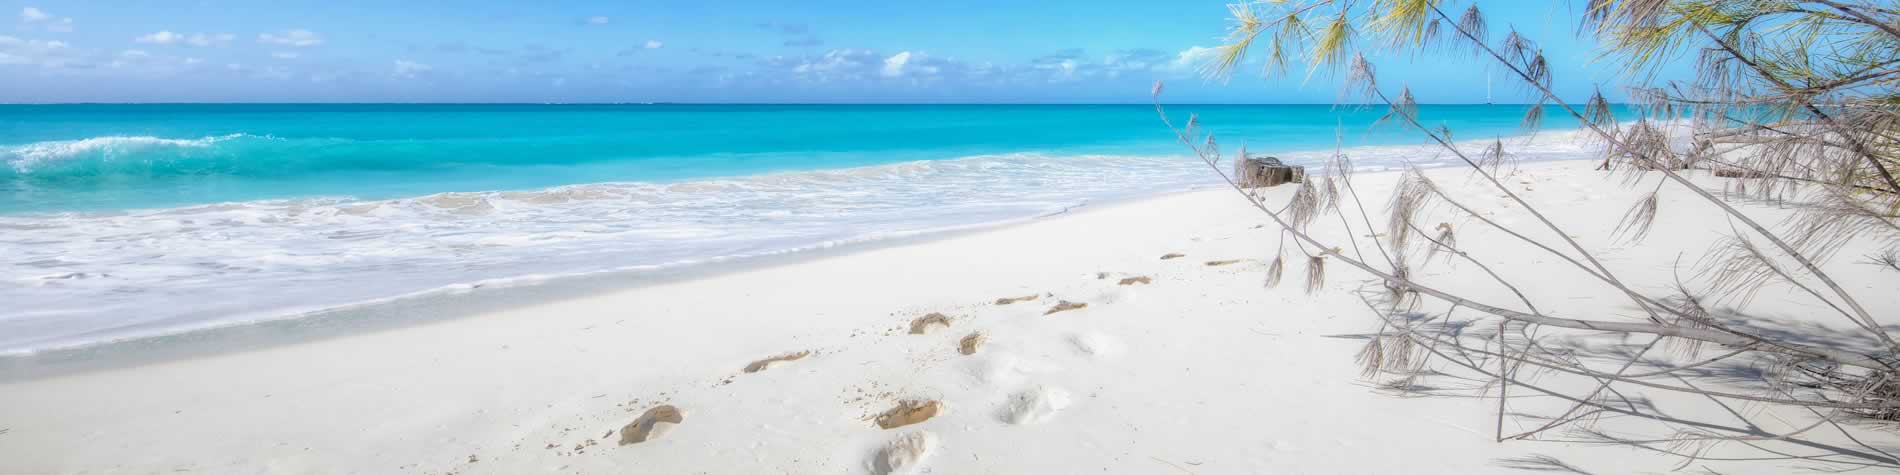 Footprints on the fine white sands of the beach